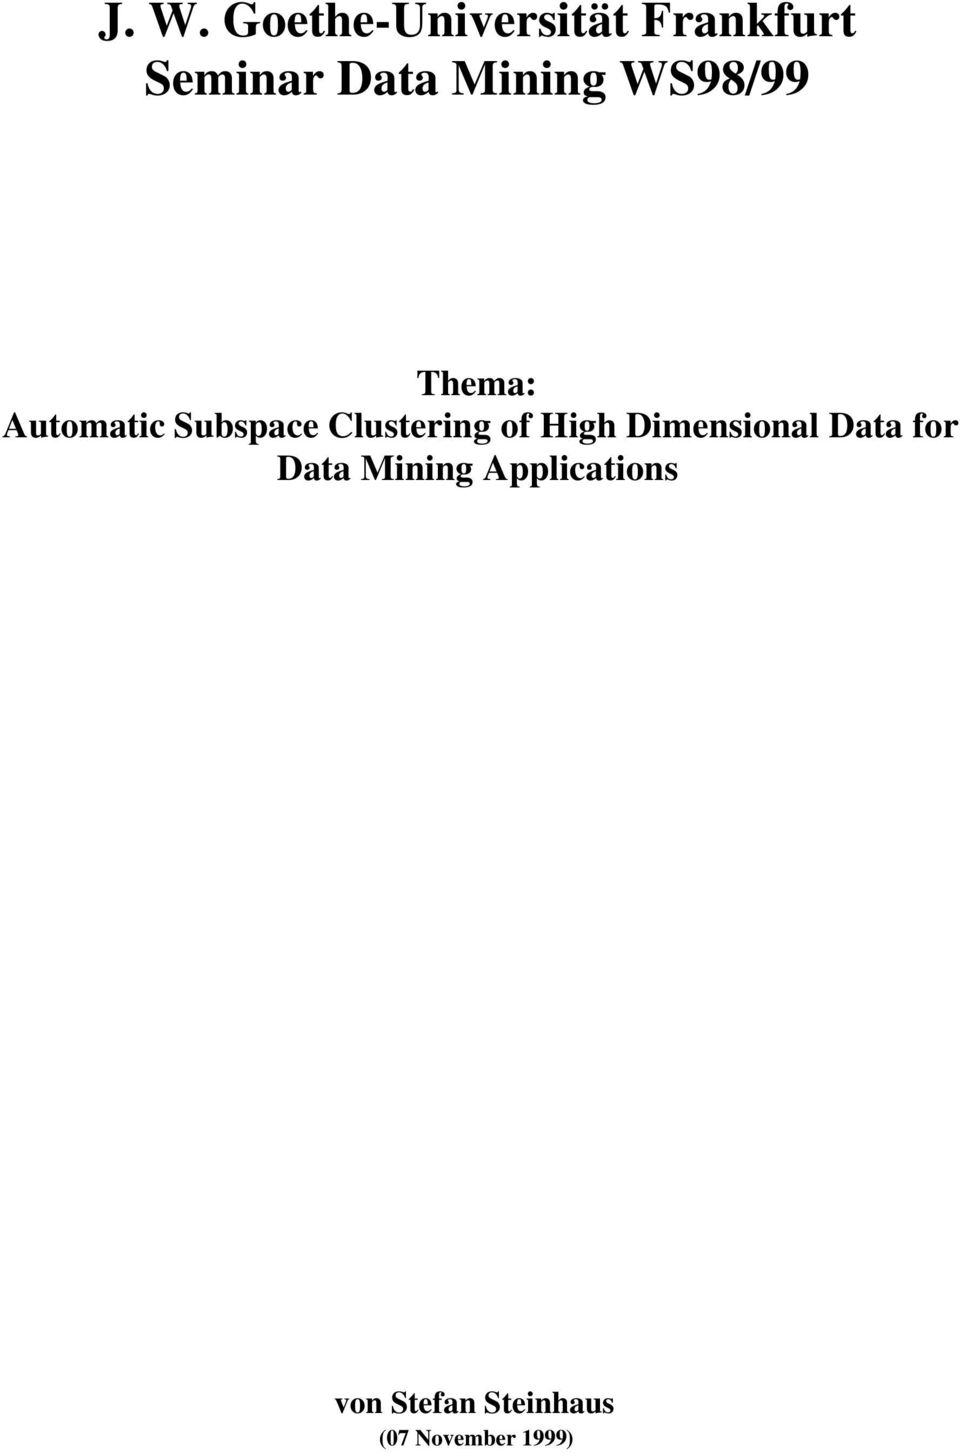 Clustering of High Dimensional Data for Data